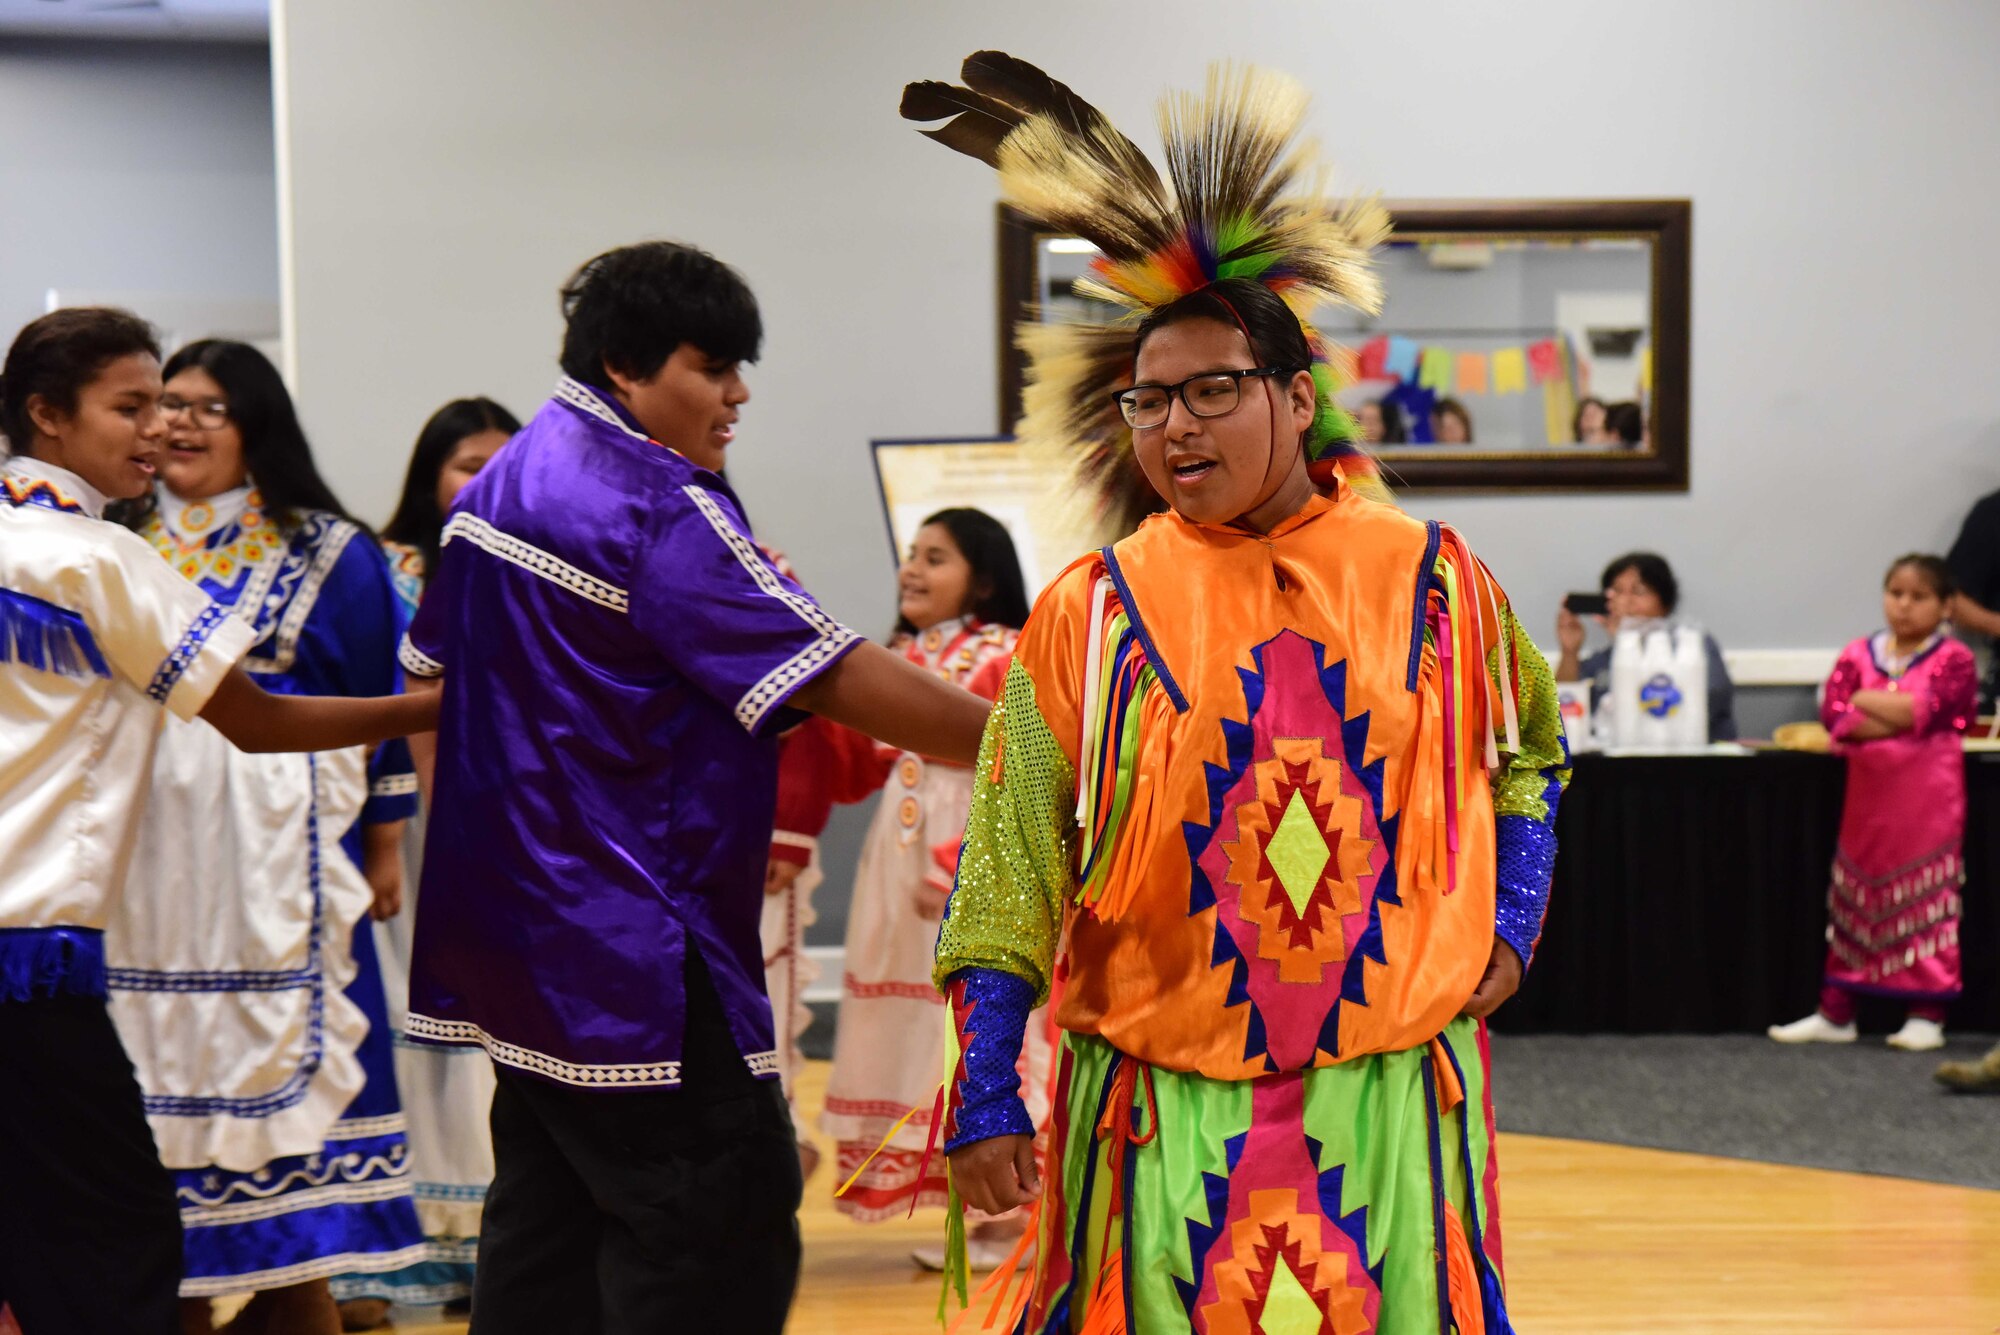 Choctaw dancers perform as a part of the Diversity Day events, June 7, 2019, on Columbus Air Force Base, Miss. The group performed multiple ceremonial Choctaw dances and chants for Team BLAZE members attending the event. (U.S. Air Force photo by Elizabeth Owens)